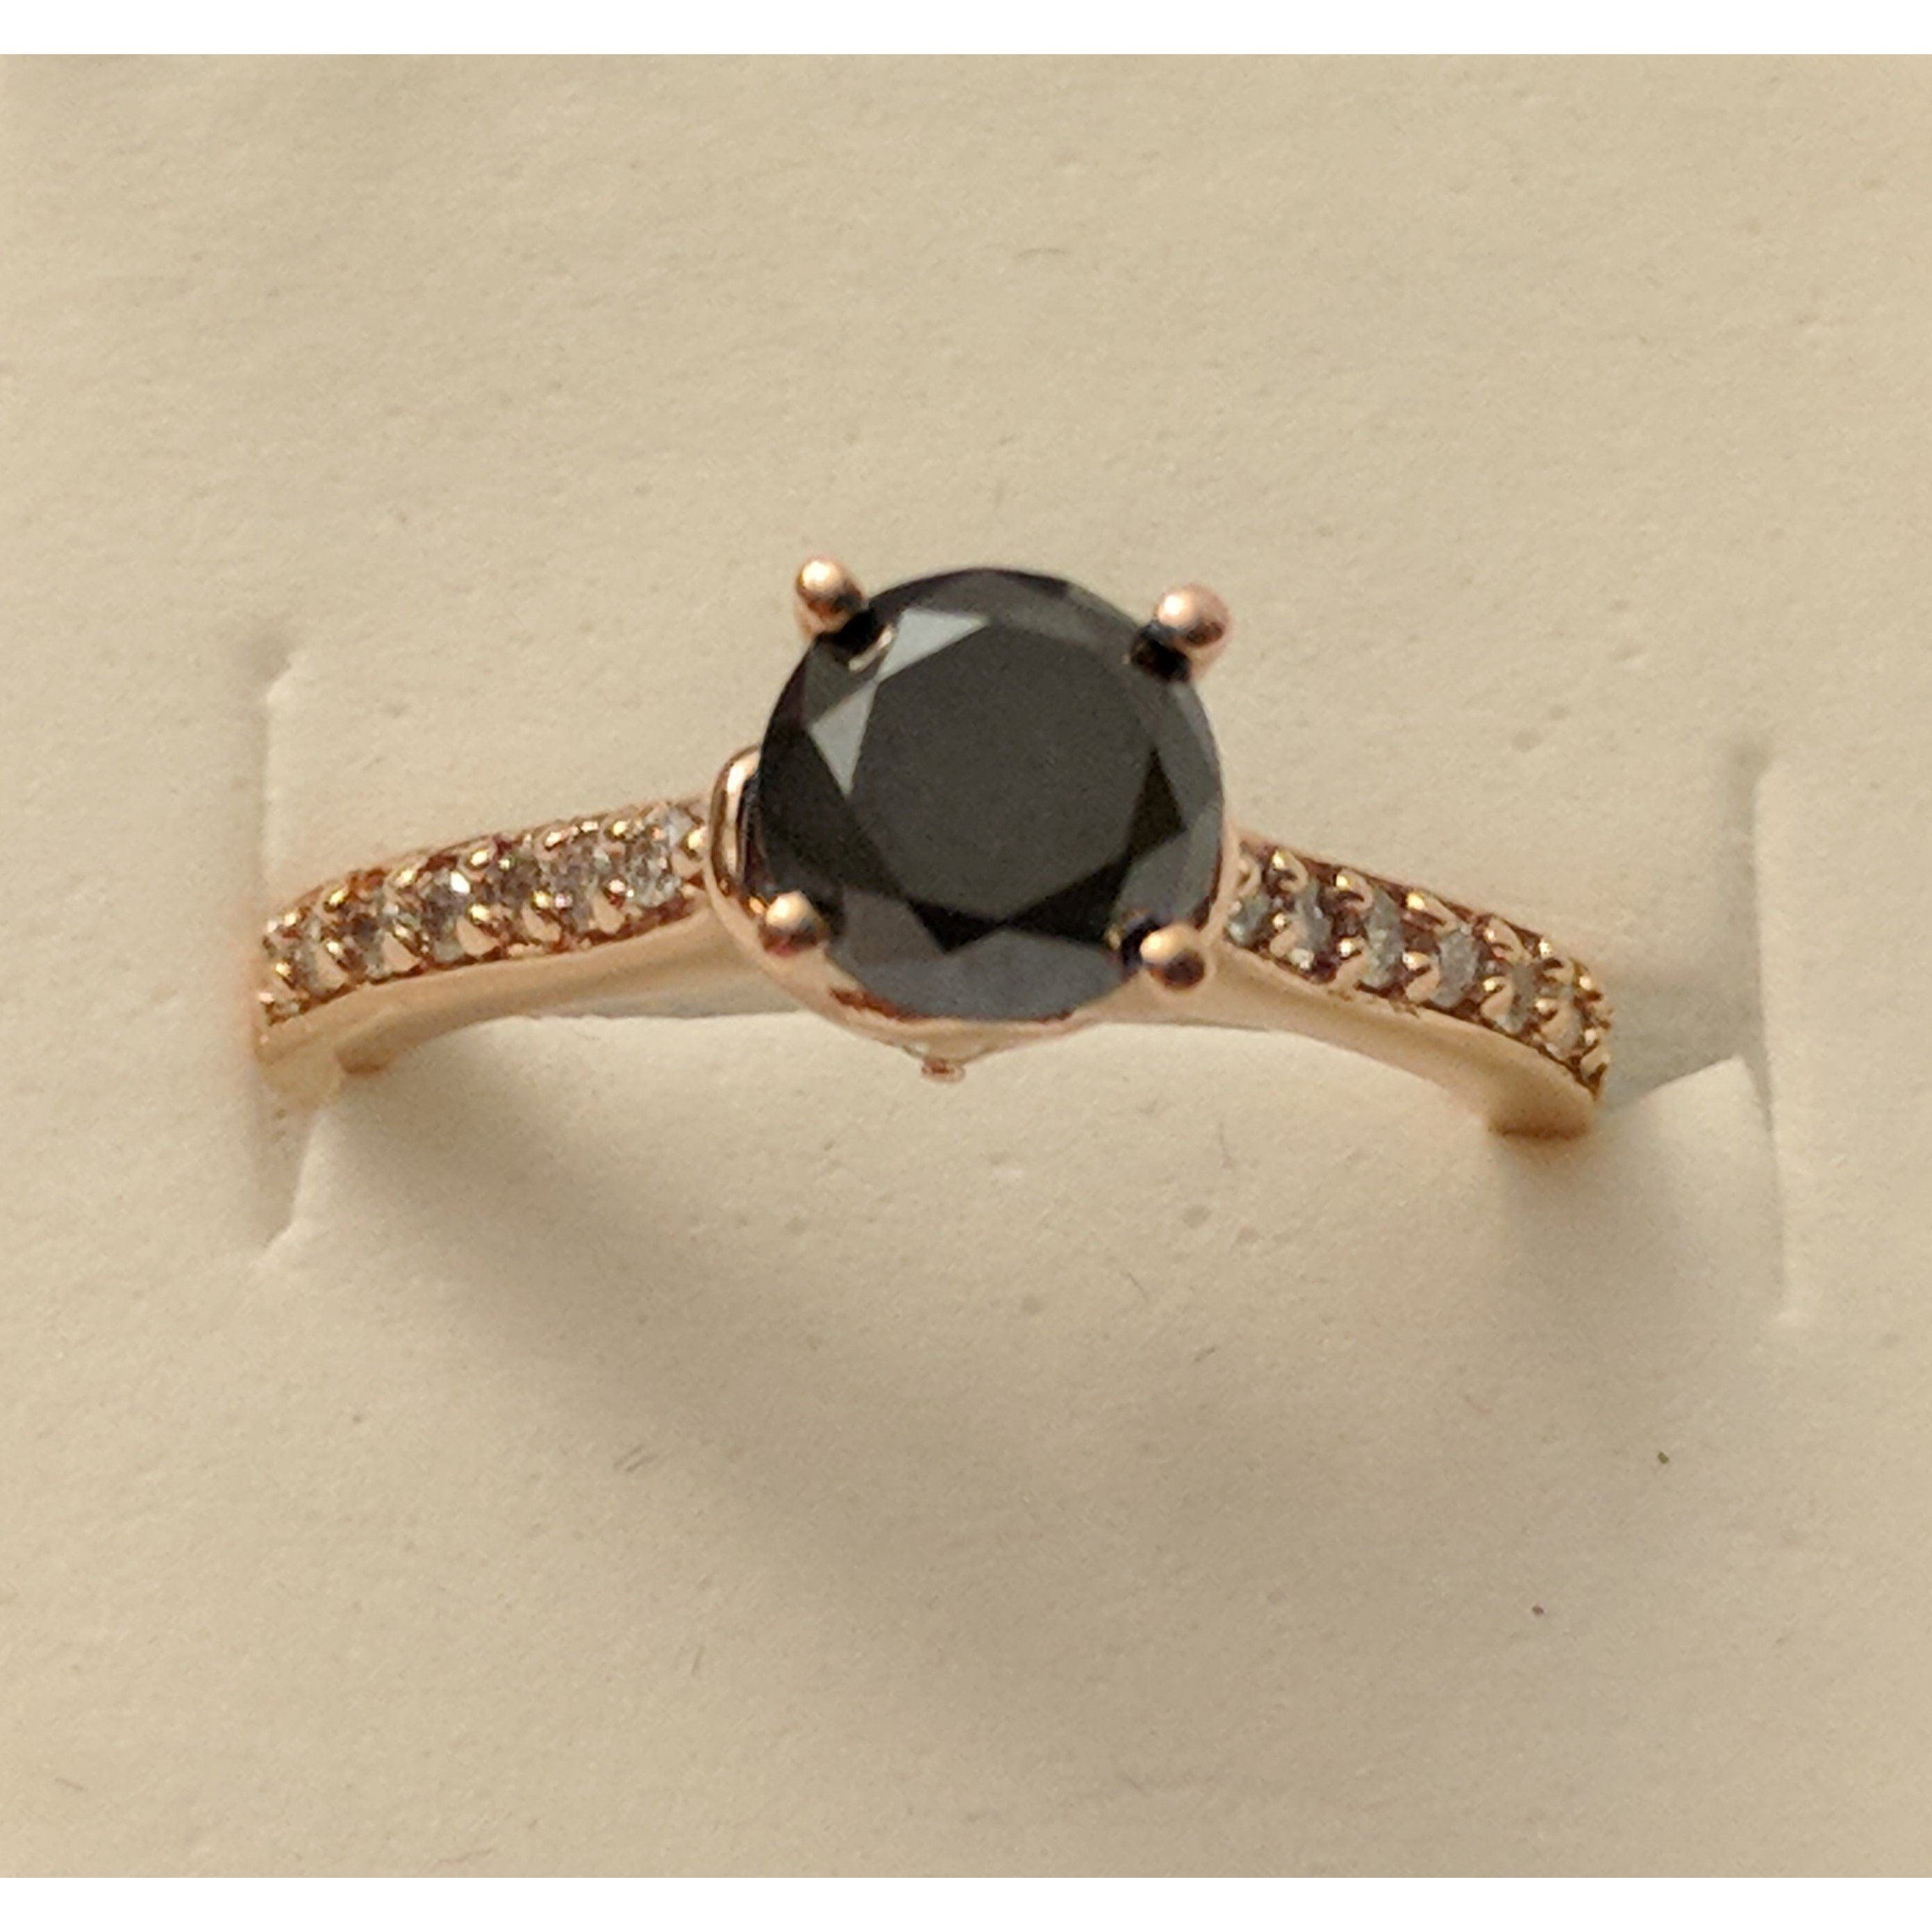 Black Diamond Solitaire Engagement Ring with Diamond Shanks, 1.5ctw in 10K Rose Gold-Gorgeous! - The Pink Pigs, A Compassionate Boutique